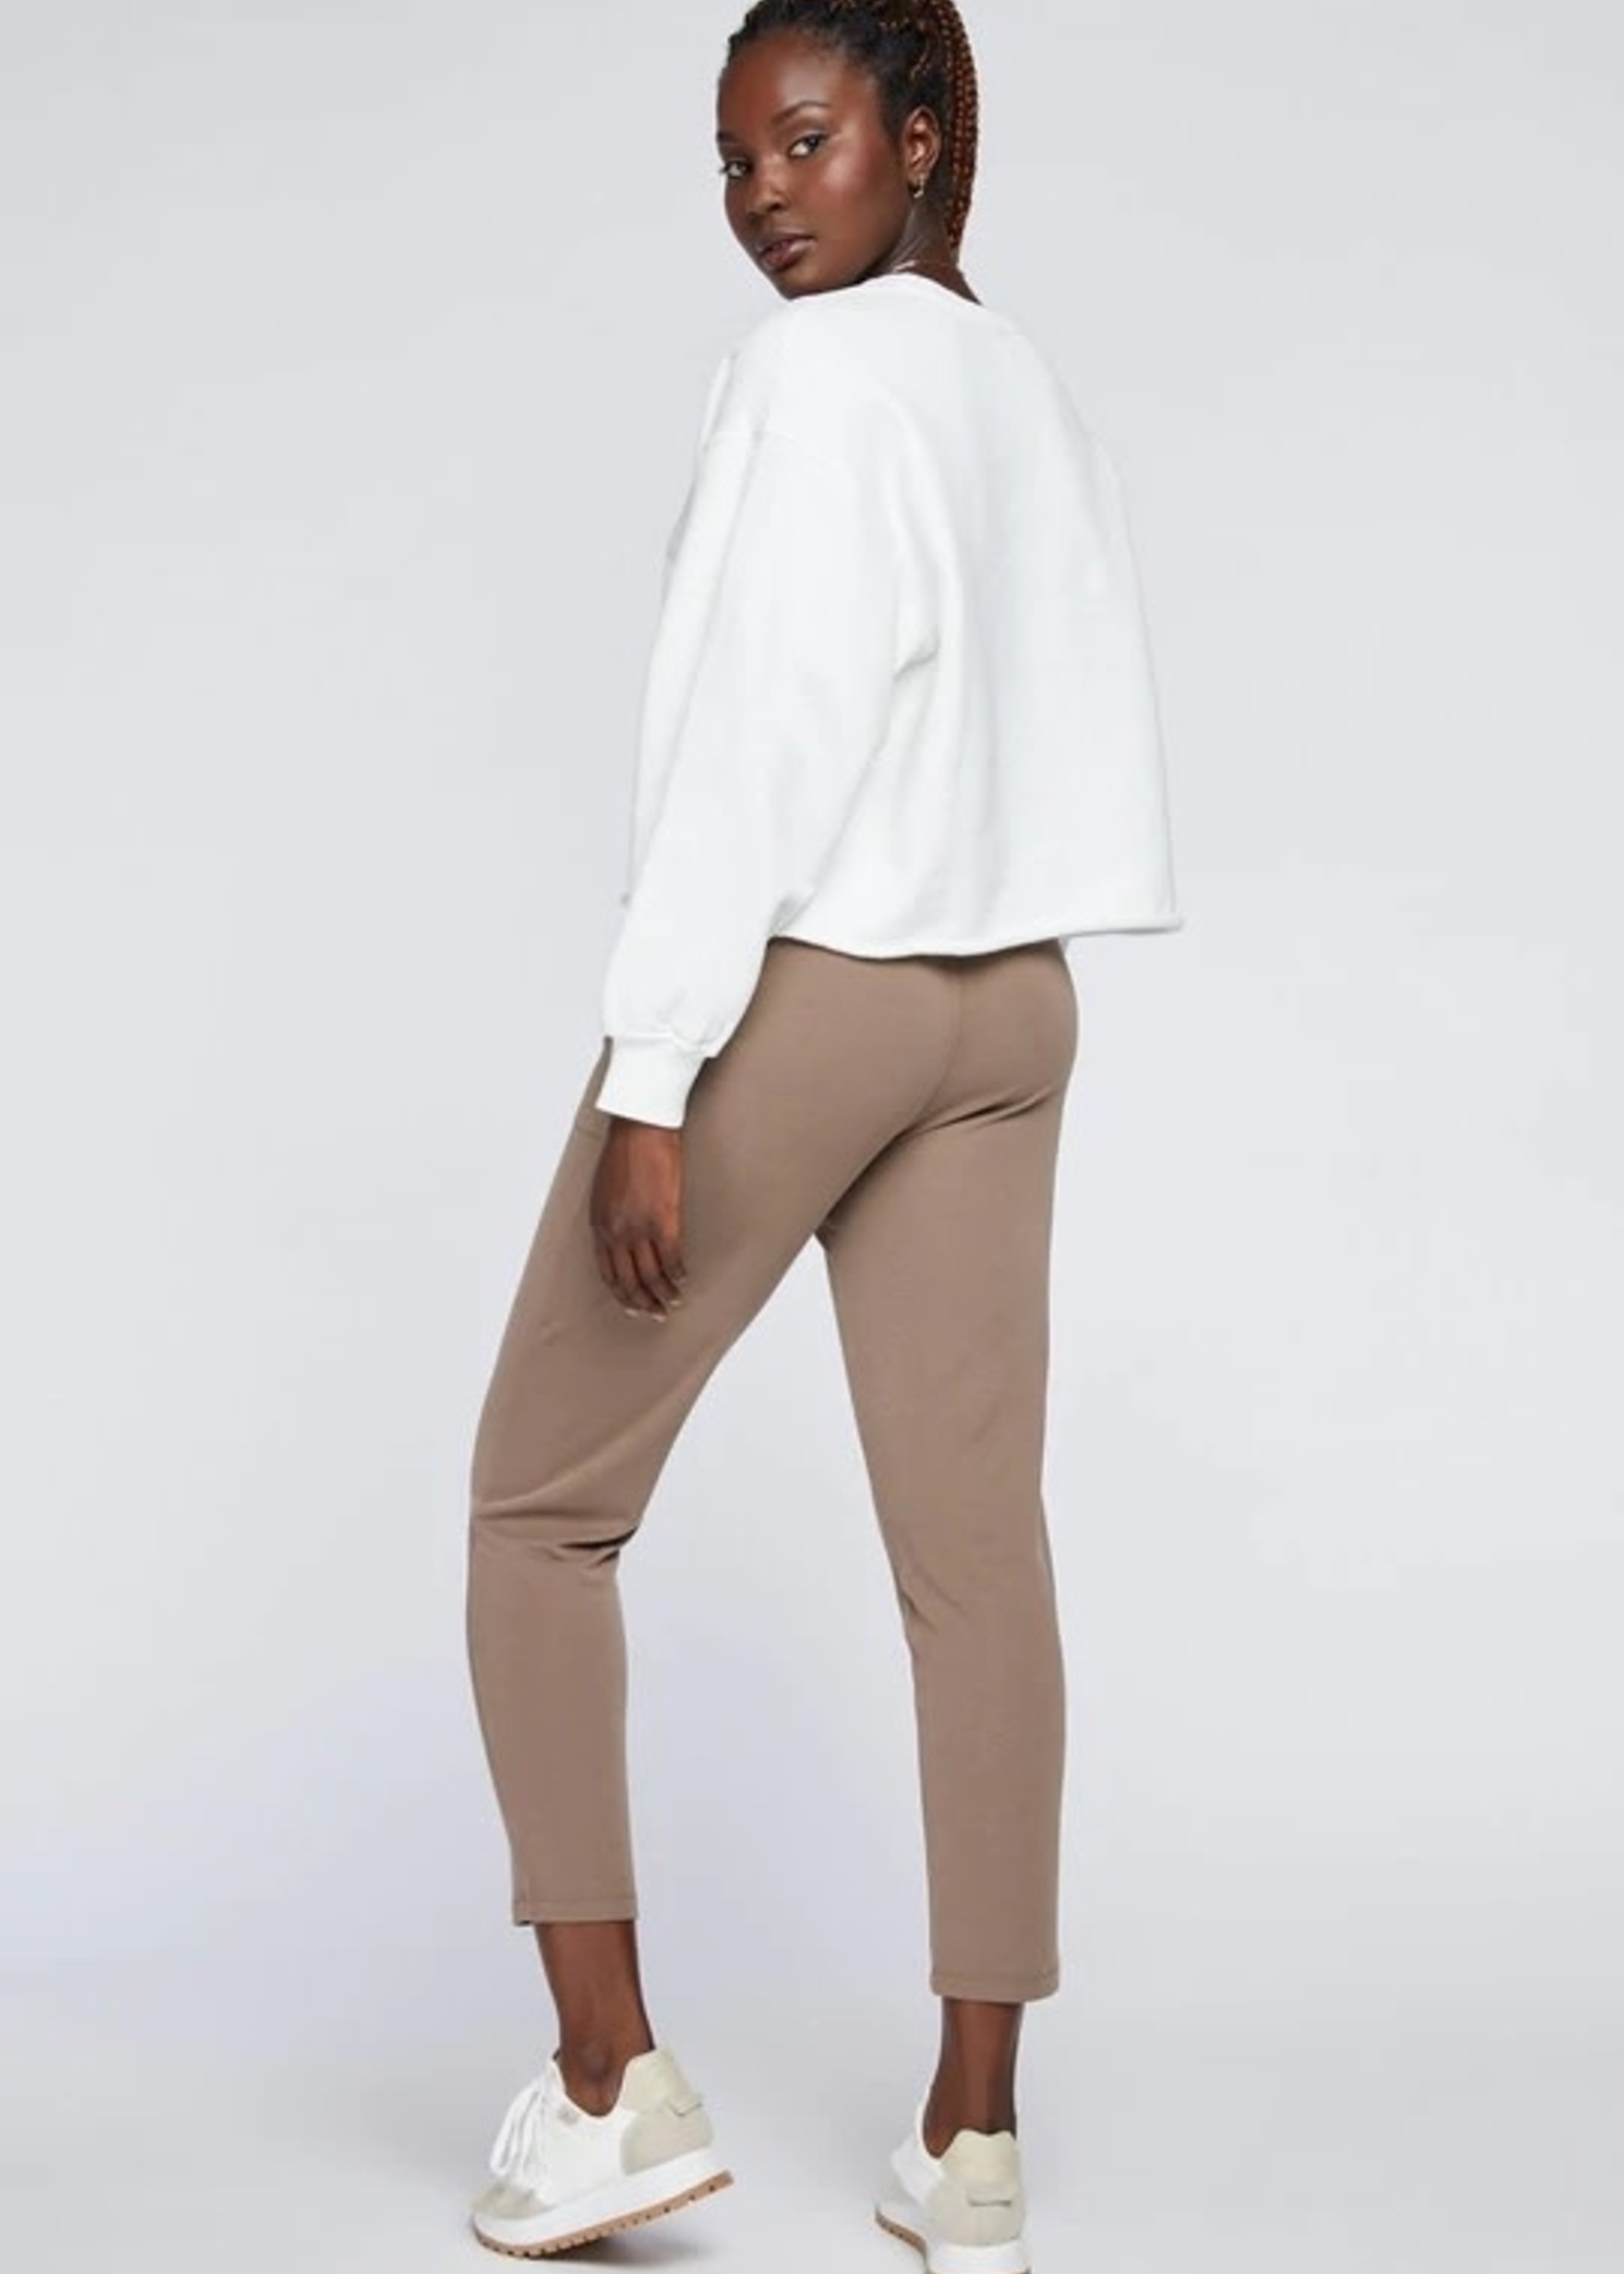 Gentle Fawn Finley Pant